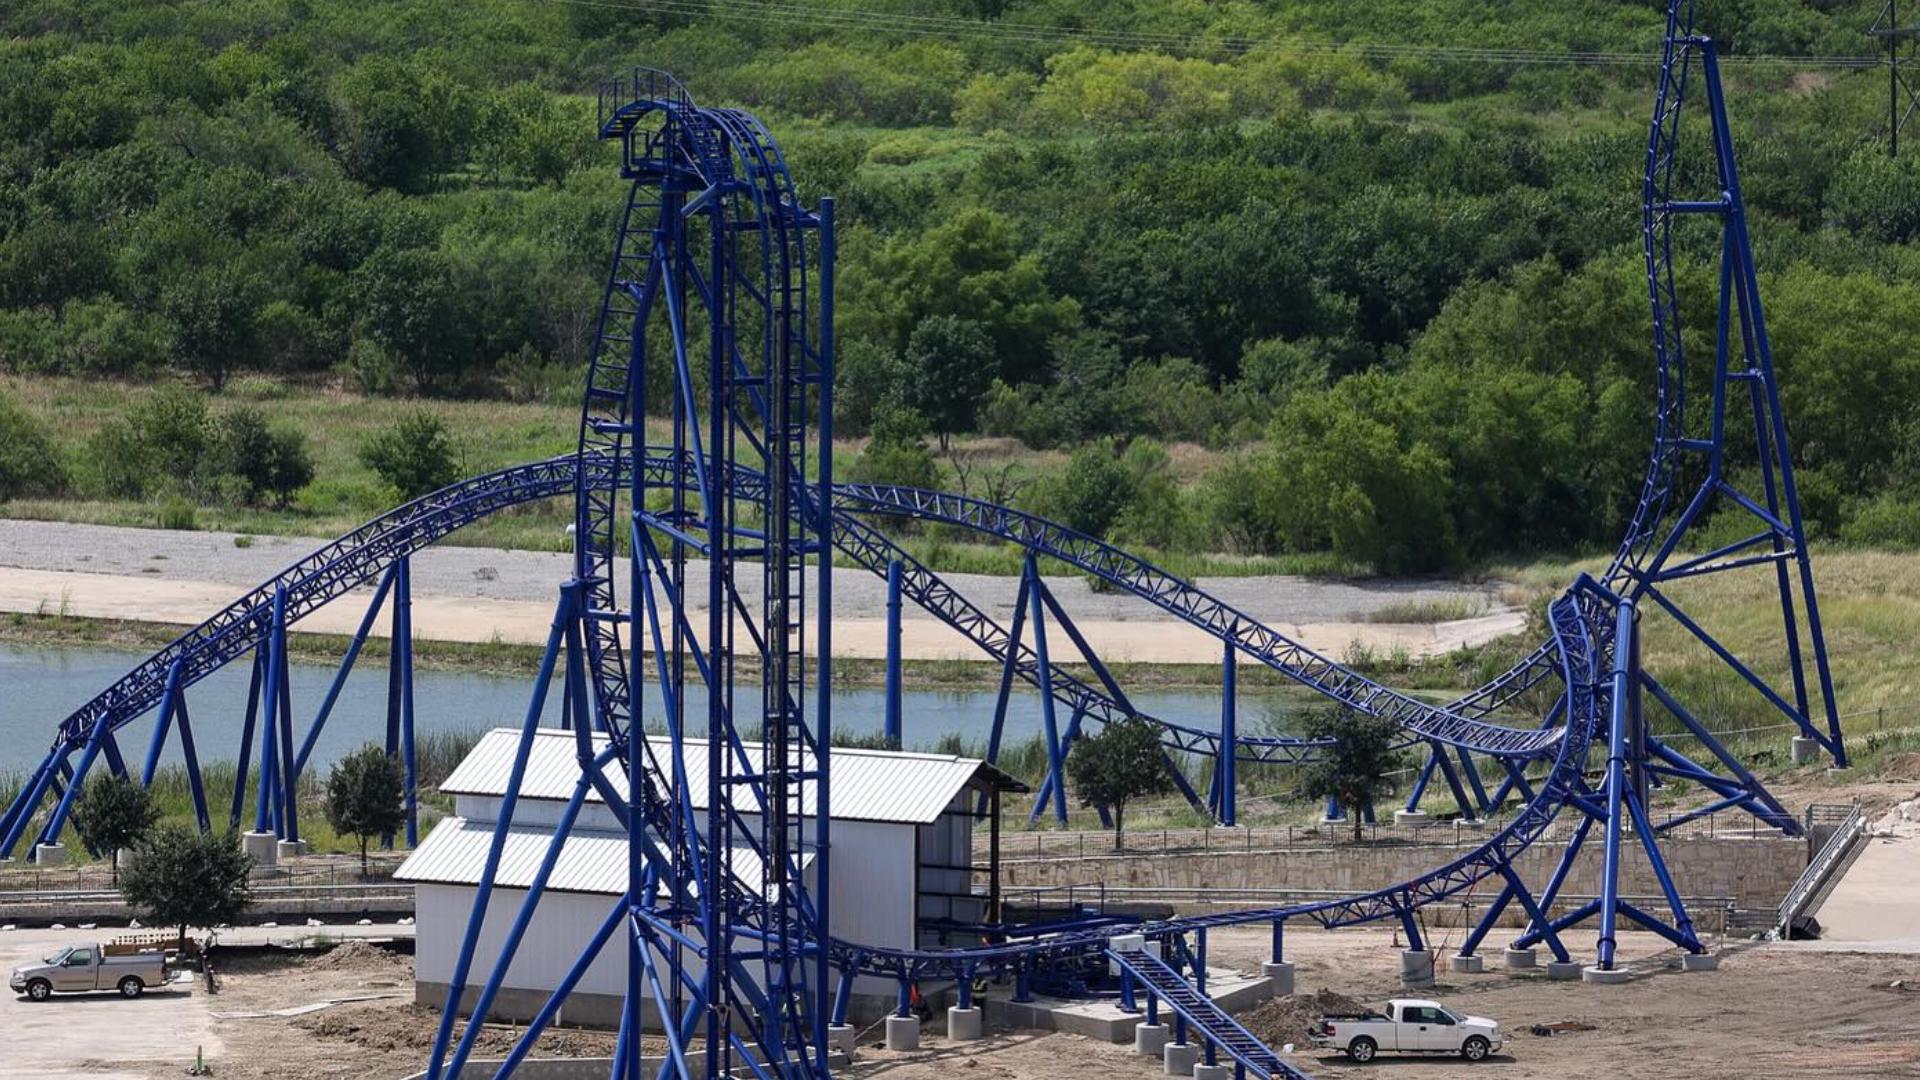 The 51 mph, 95-foot tall coaster is set to be part of the upcoming COTALAND amusement park.